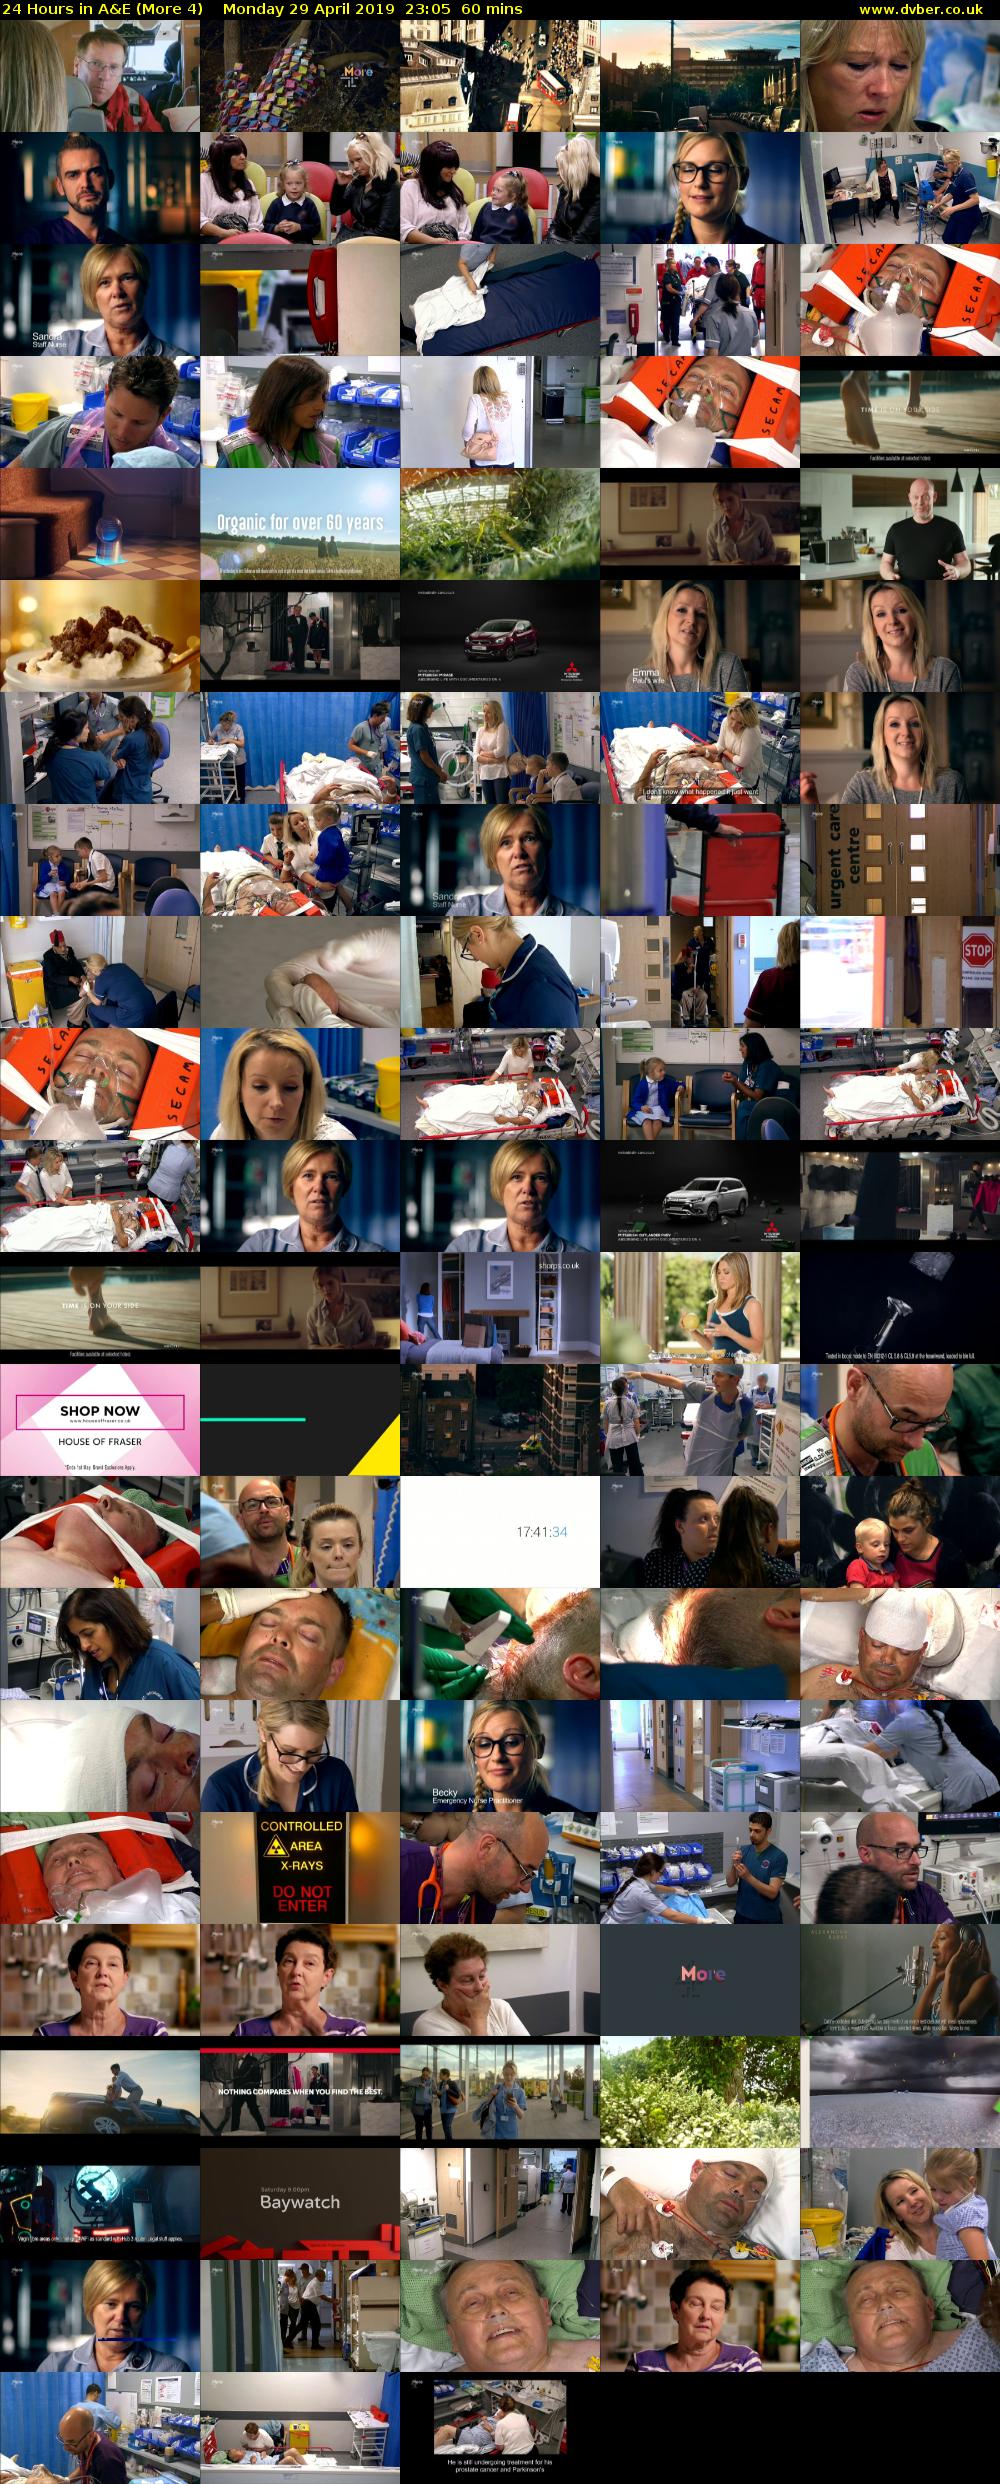 24 Hours in A&E (More 4) Monday 29 April 2019 23:05 - 00:05